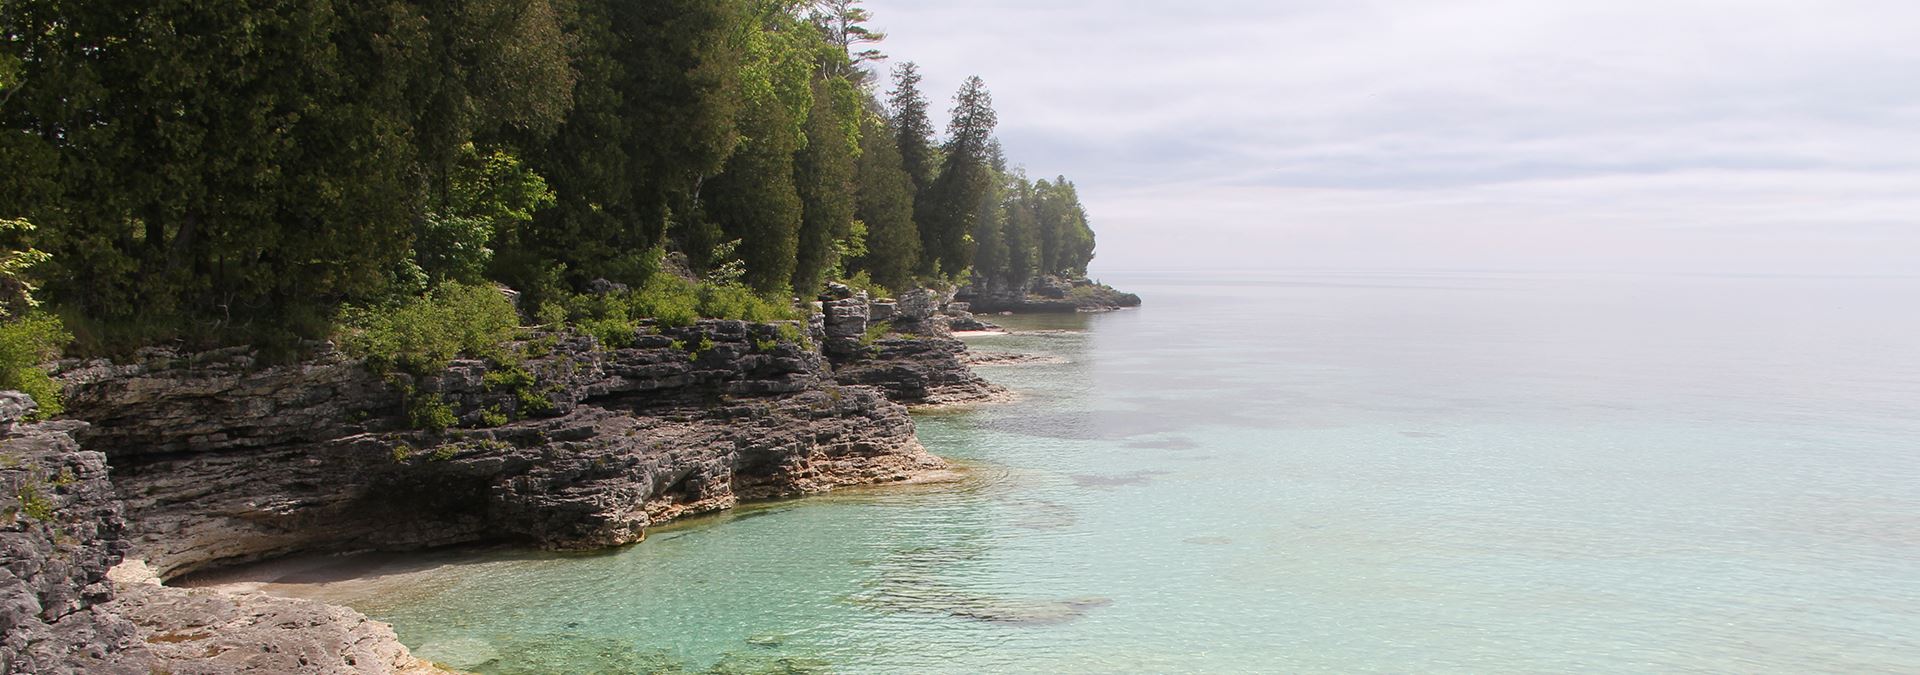 Trees lining the rocky lakeshore at Cave Point.